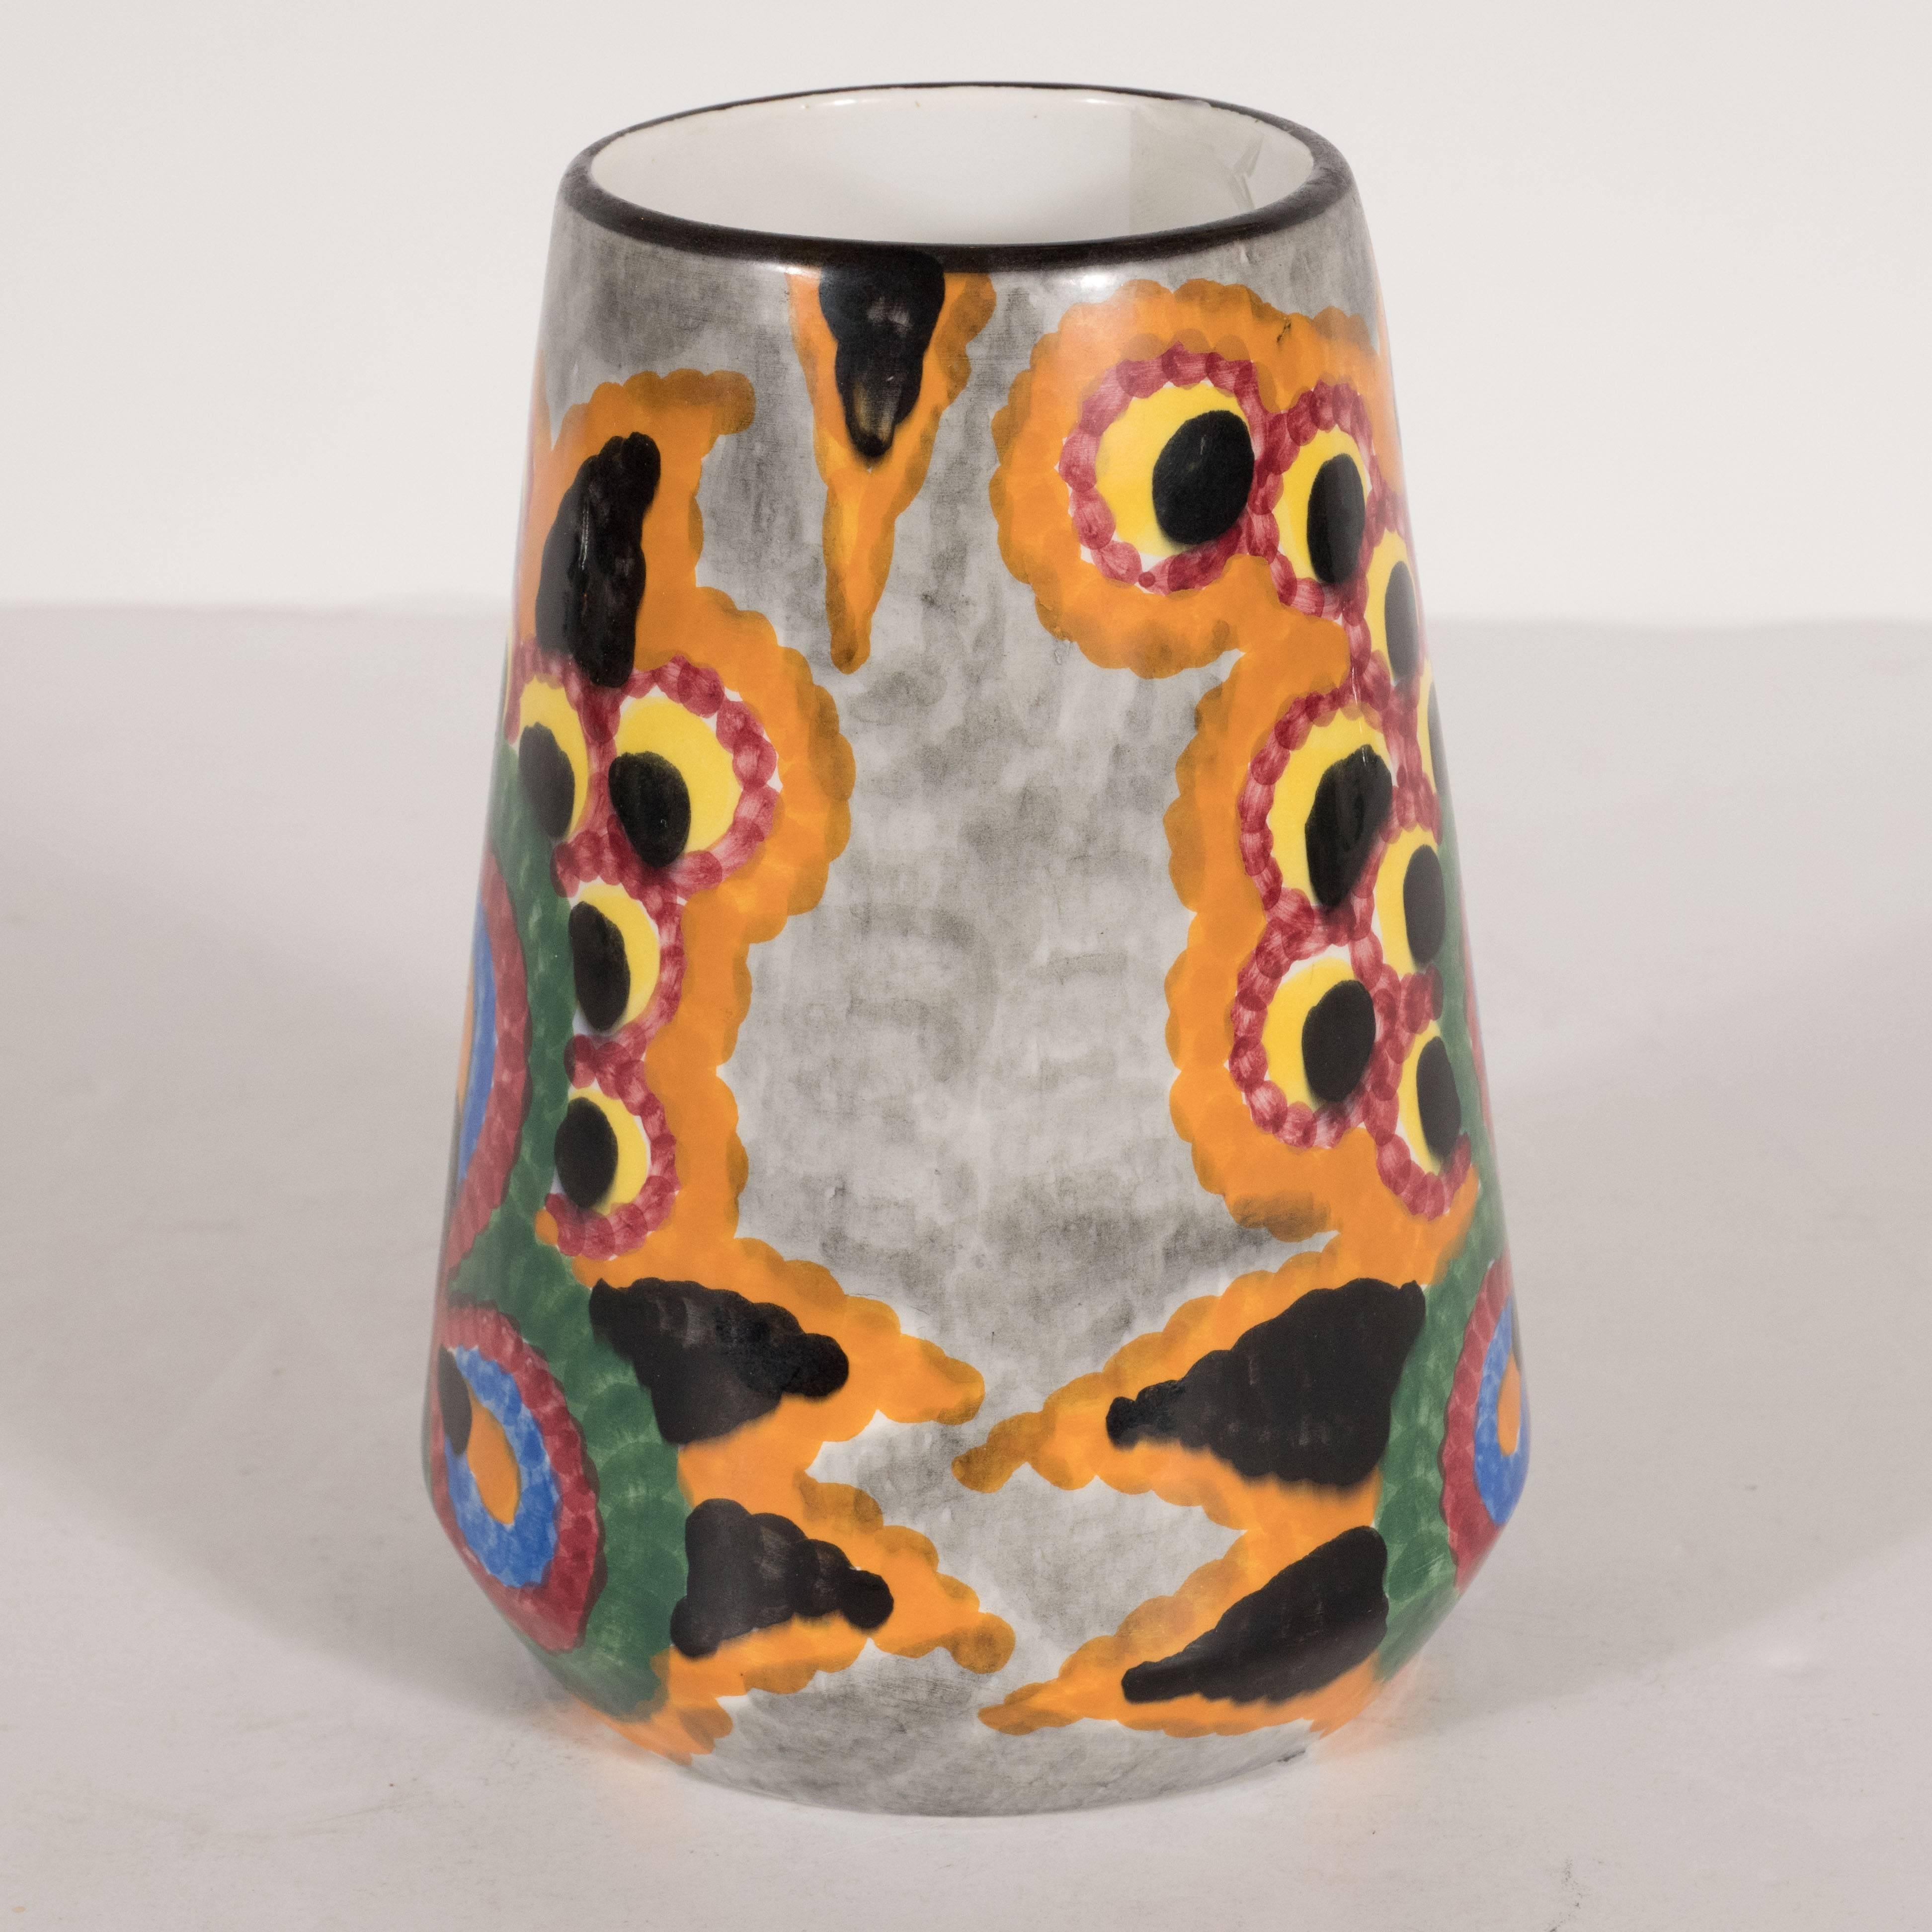 German Art Deco Hand-Painted Schramberg SMF Vase with Vibrant Abstract Patterns